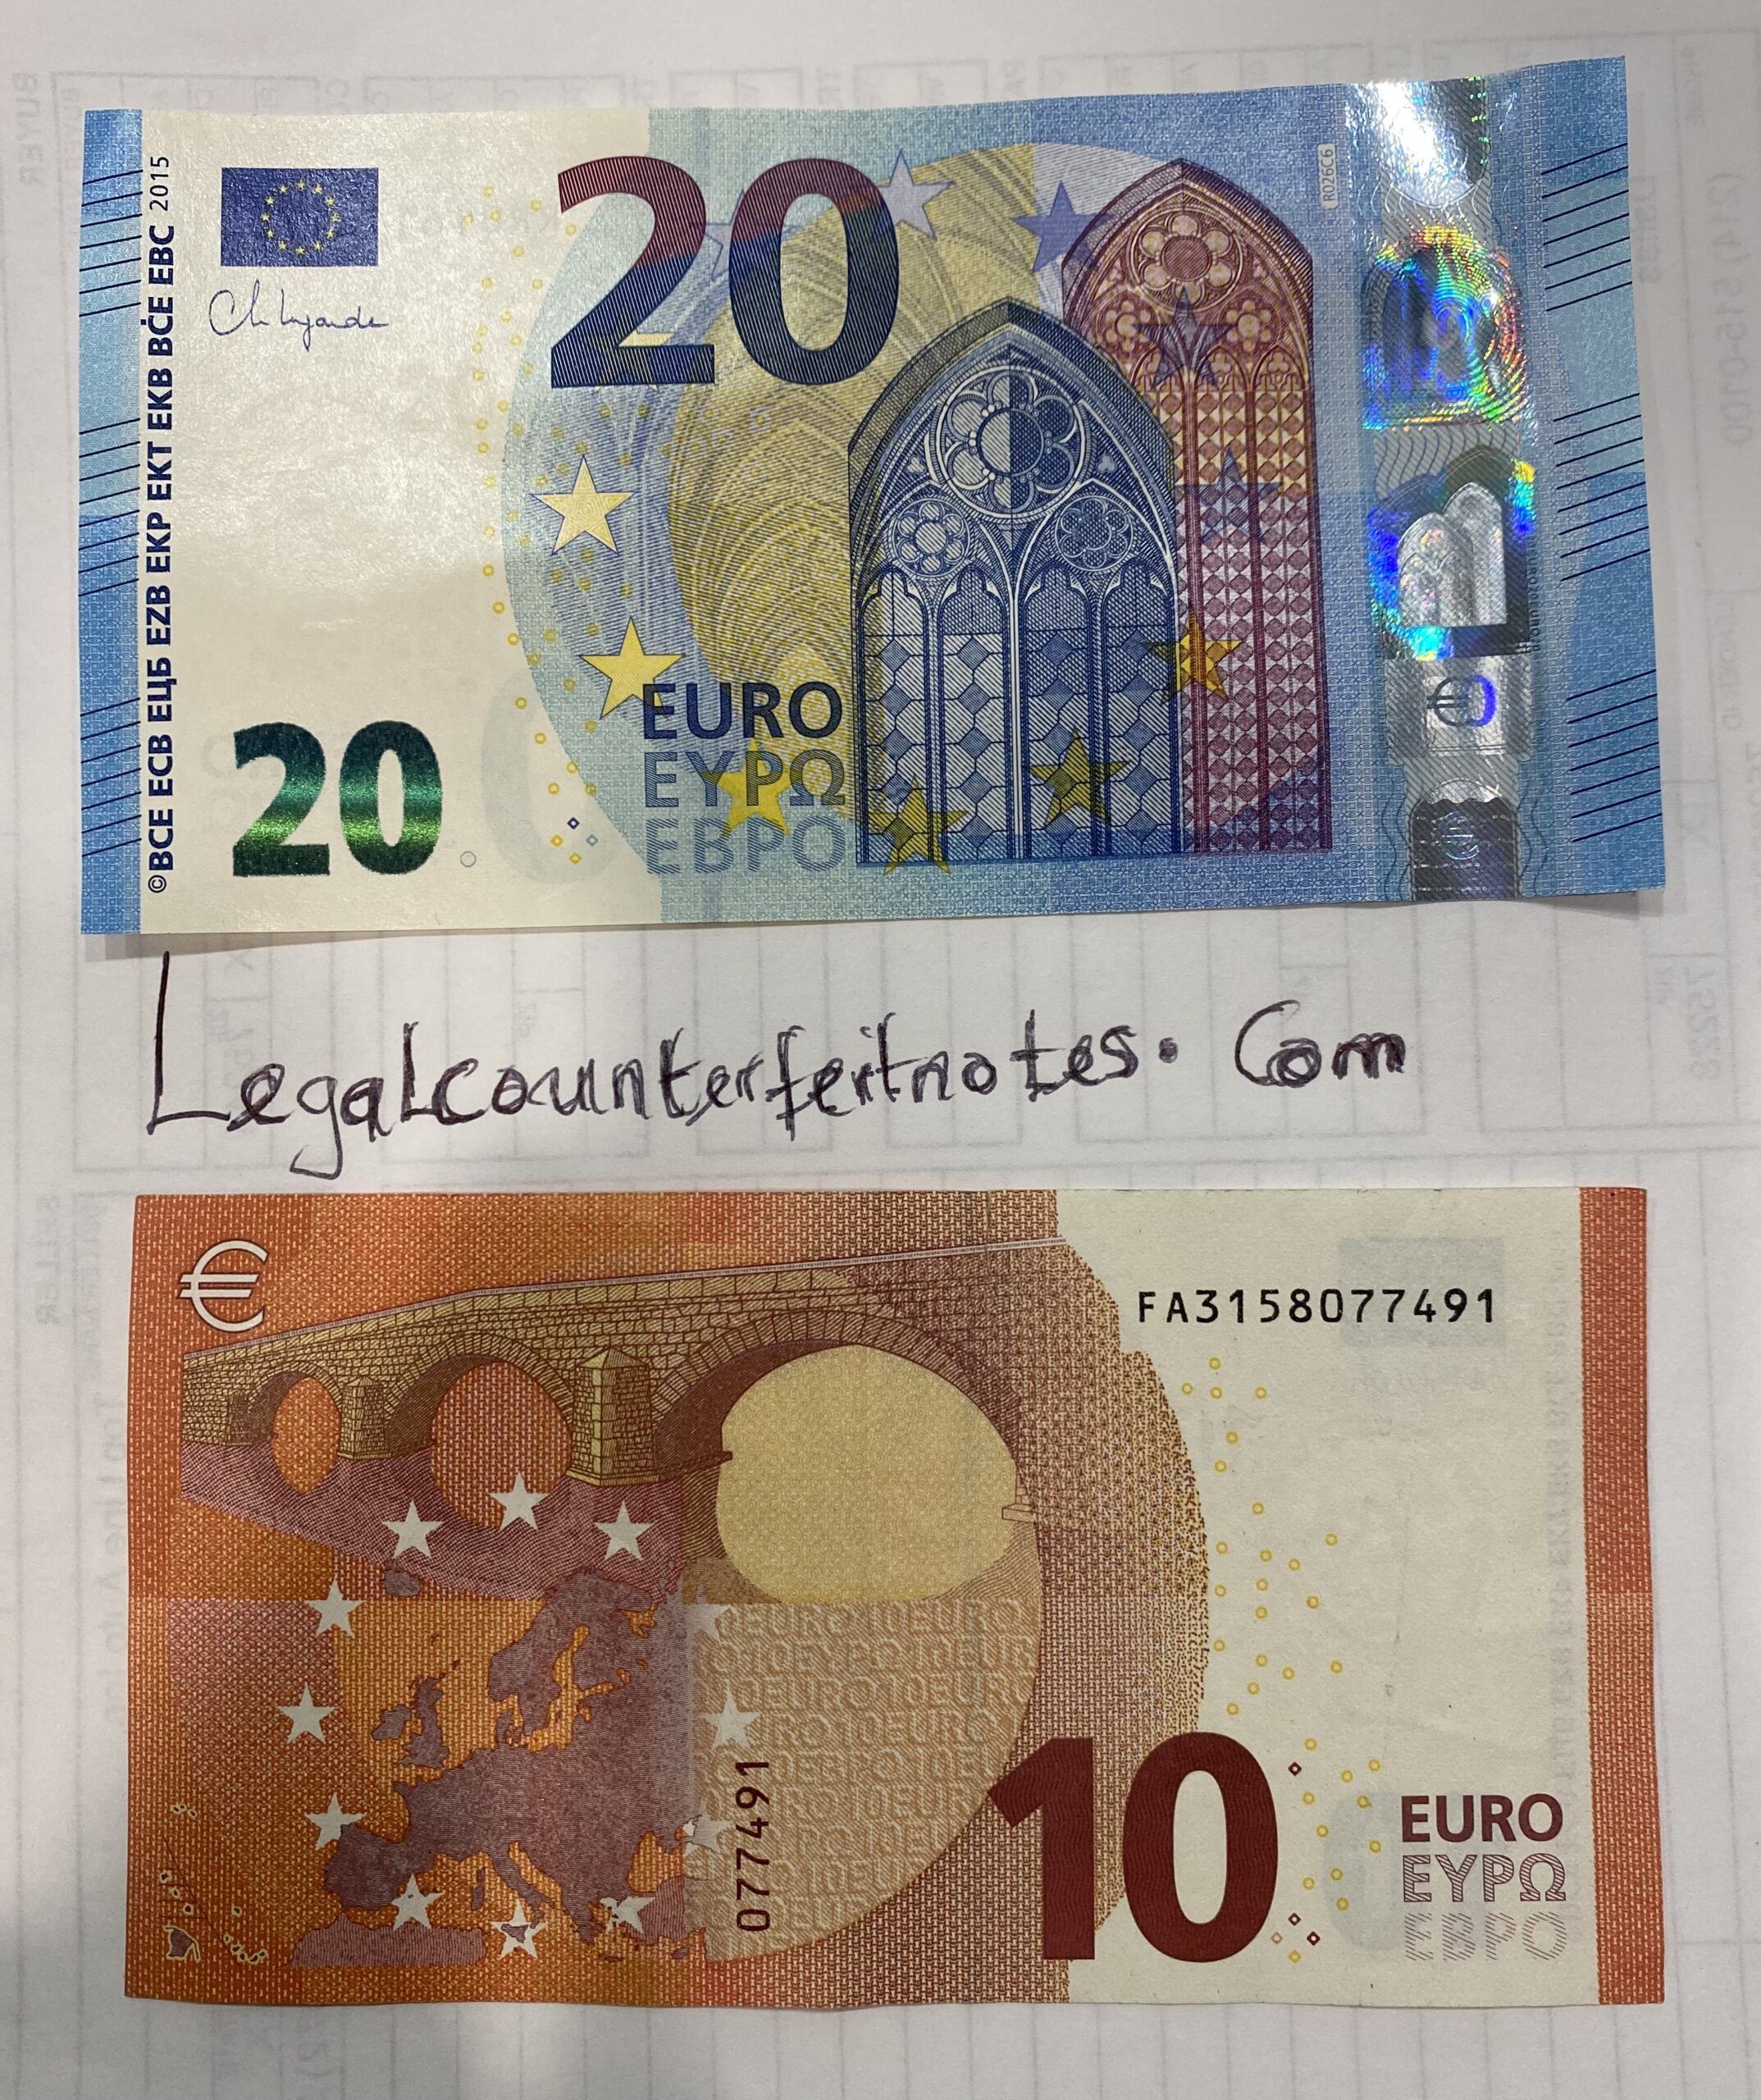 Buy Fake Euro Online: real-Looking Counterfeits Euro | LegalCounterfeitNote.com